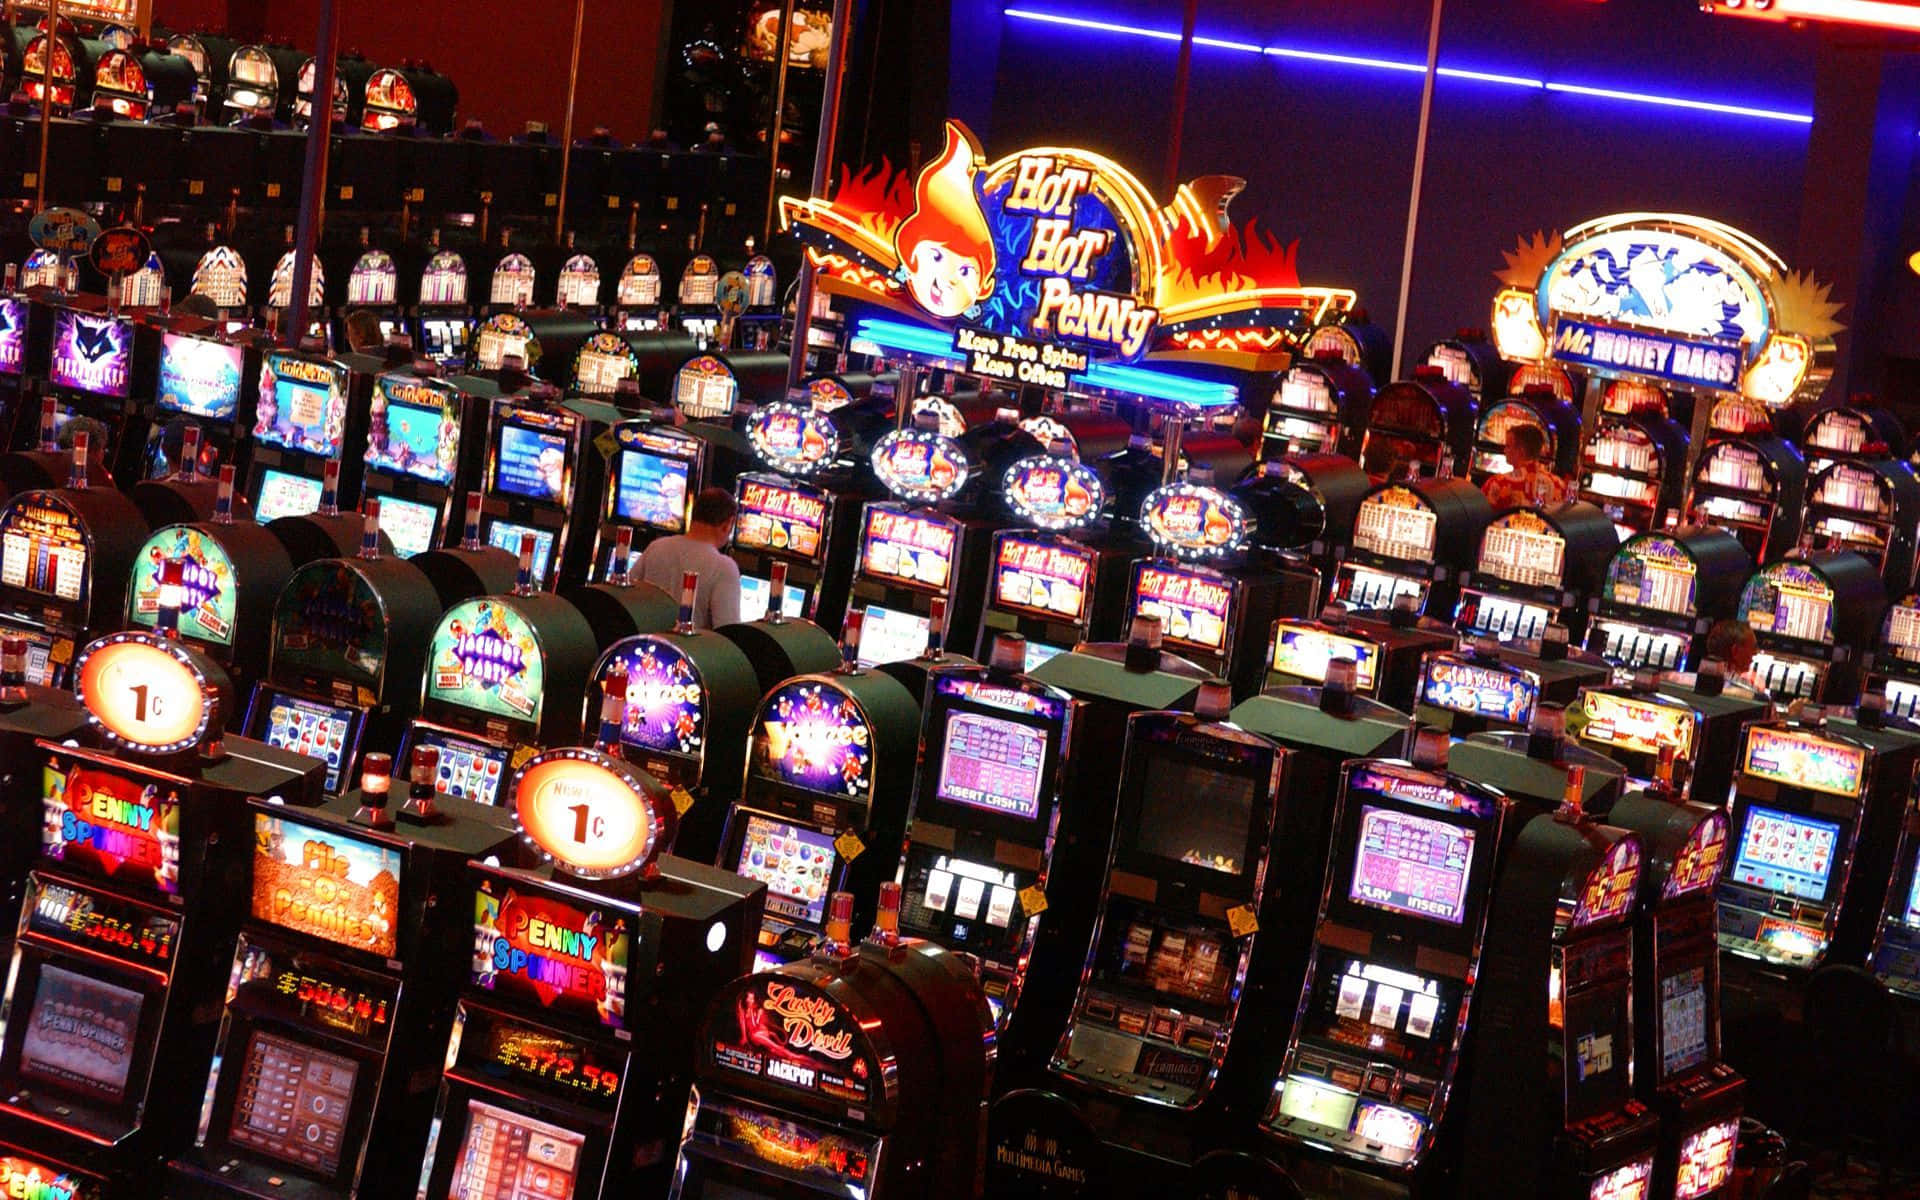 Enjoy the adventure of spinning the slots!